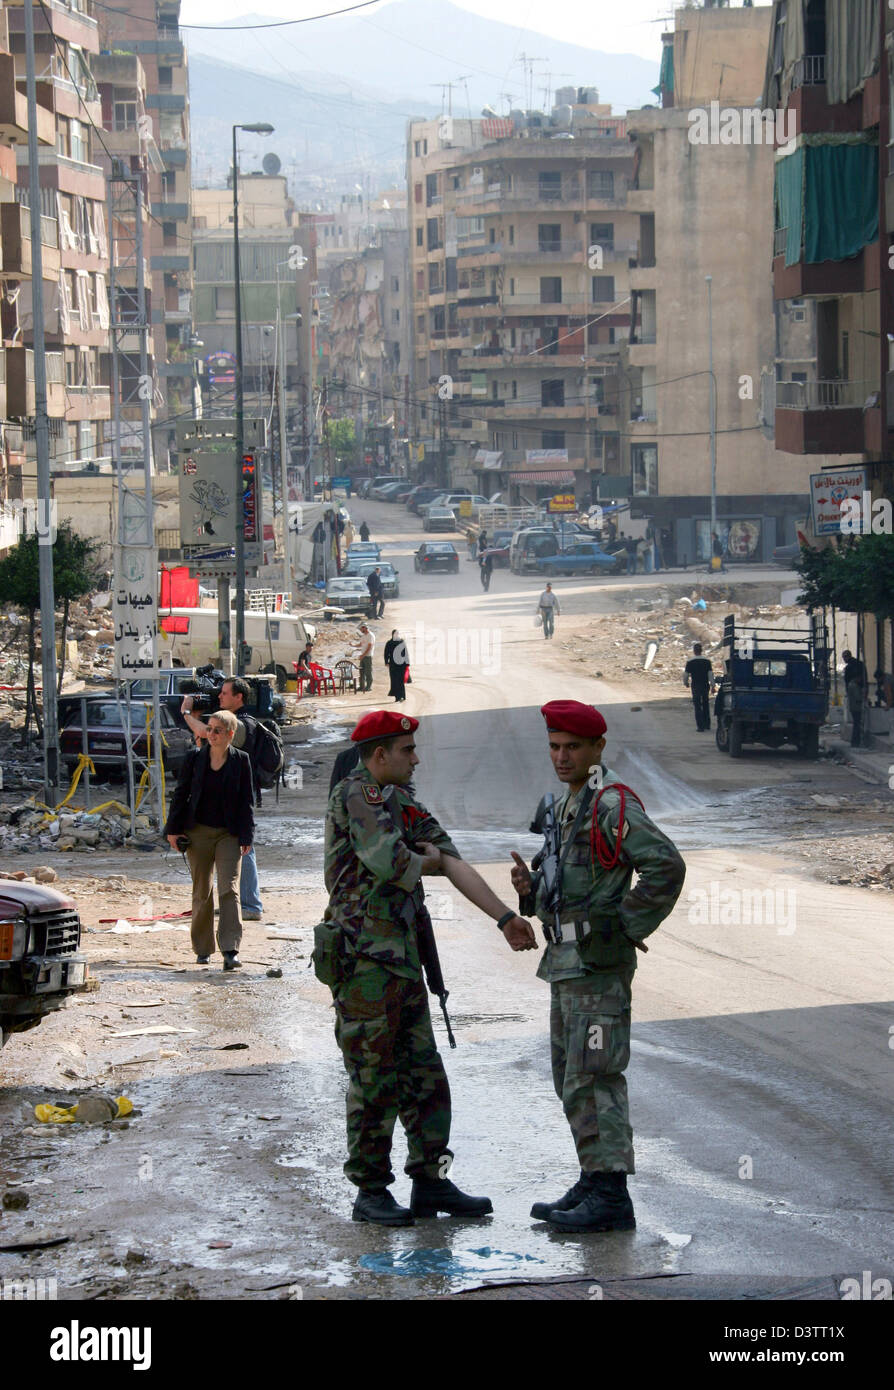 Two soldiers stand in a street with appartement buildings and stores in the capital Beirut, Lebanon, Friday, 03 November 2006. Photo: Gero Breloer Stock Photo